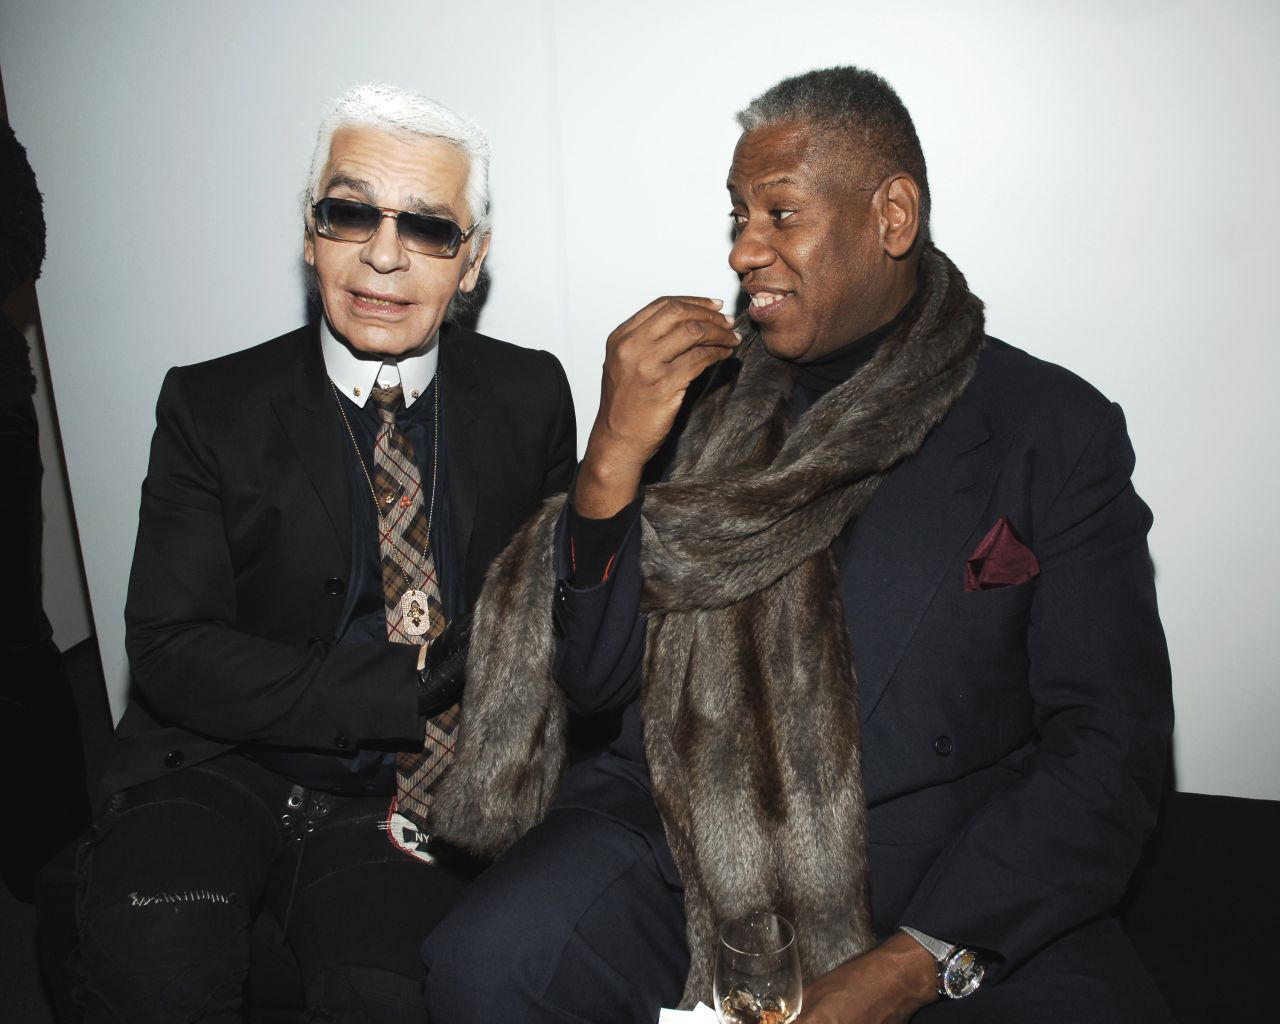 Karl Lagerfeld and Talley had reportedly known each other since 1975. In a remembrance essay for Vogue after Lagerfeld's death in 2019, Talley said the designer was both a close friend and a mentor.